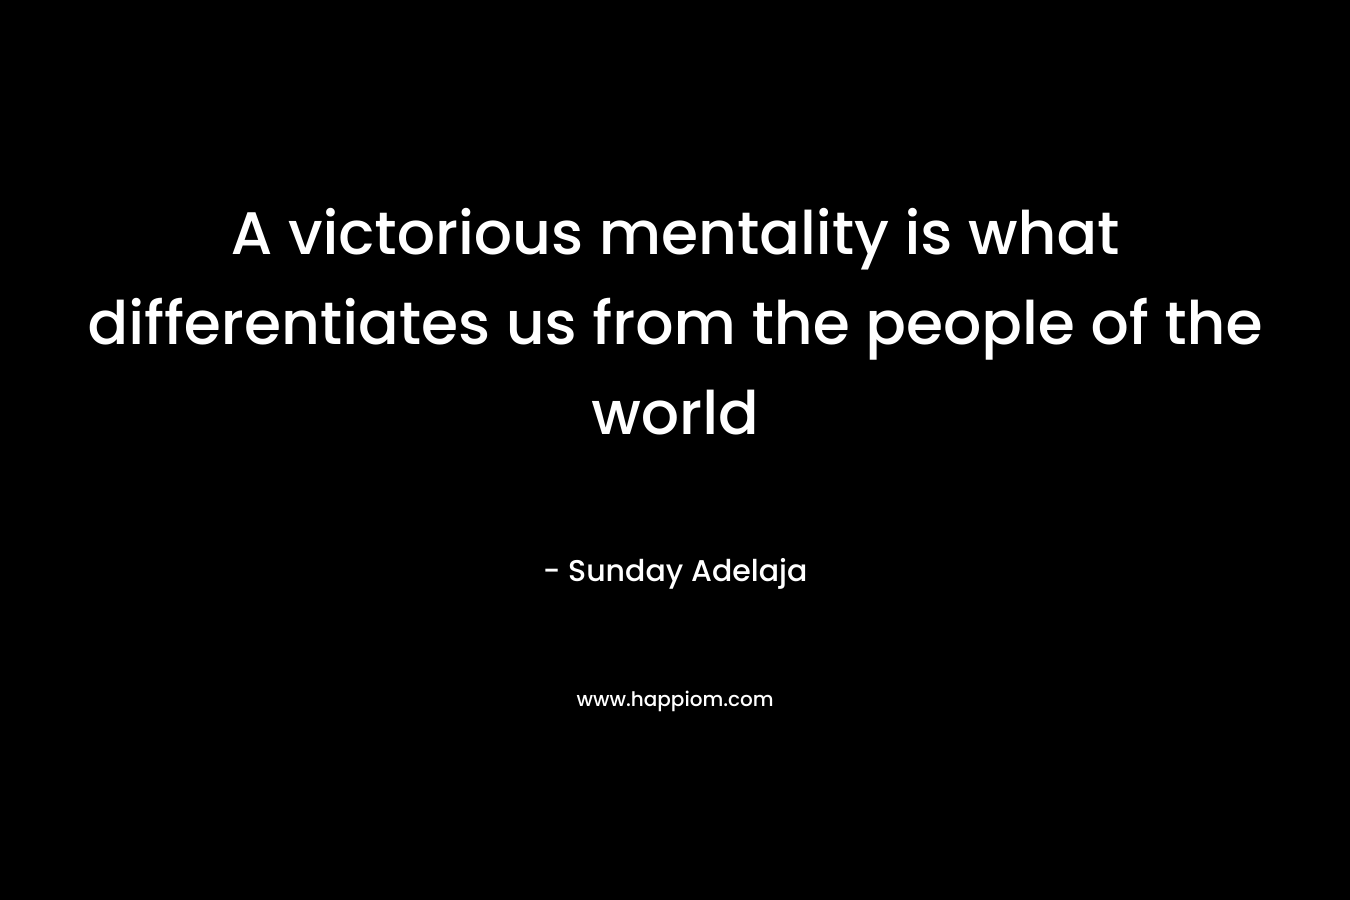 A victorious mentality is what differentiates us from the people of the world – Sunday Adelaja